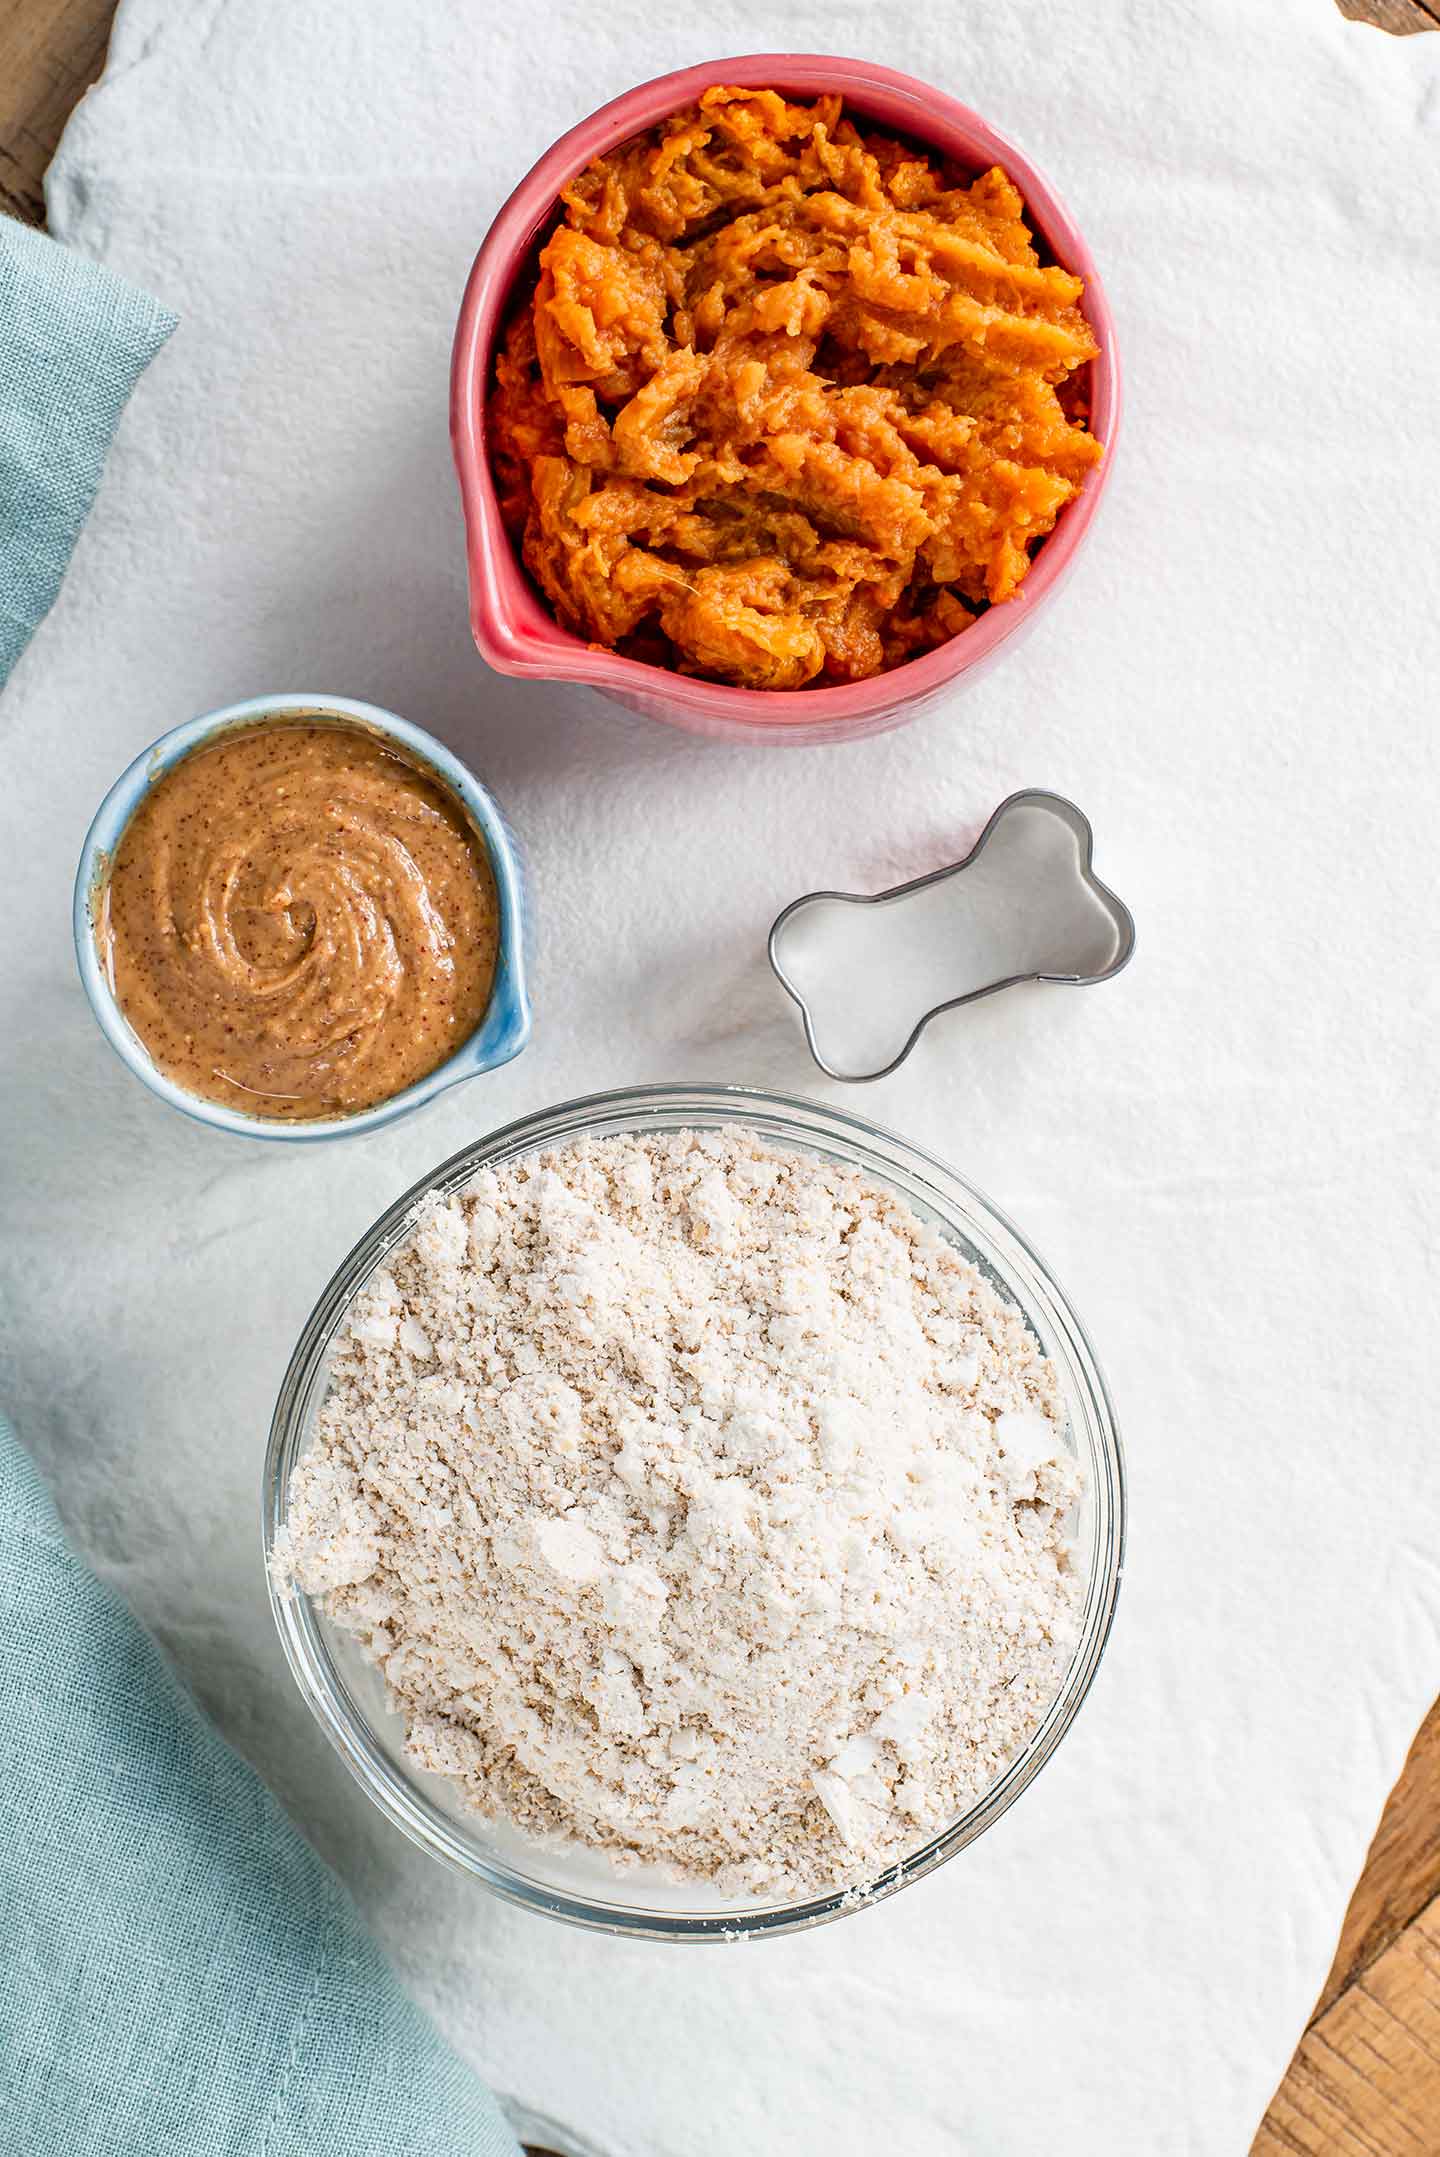 Top down view of ingredients on a white tray. Mashed sweet potato fills a small bowl next to small bowls of peanut butter and oats ground into a fine flour.